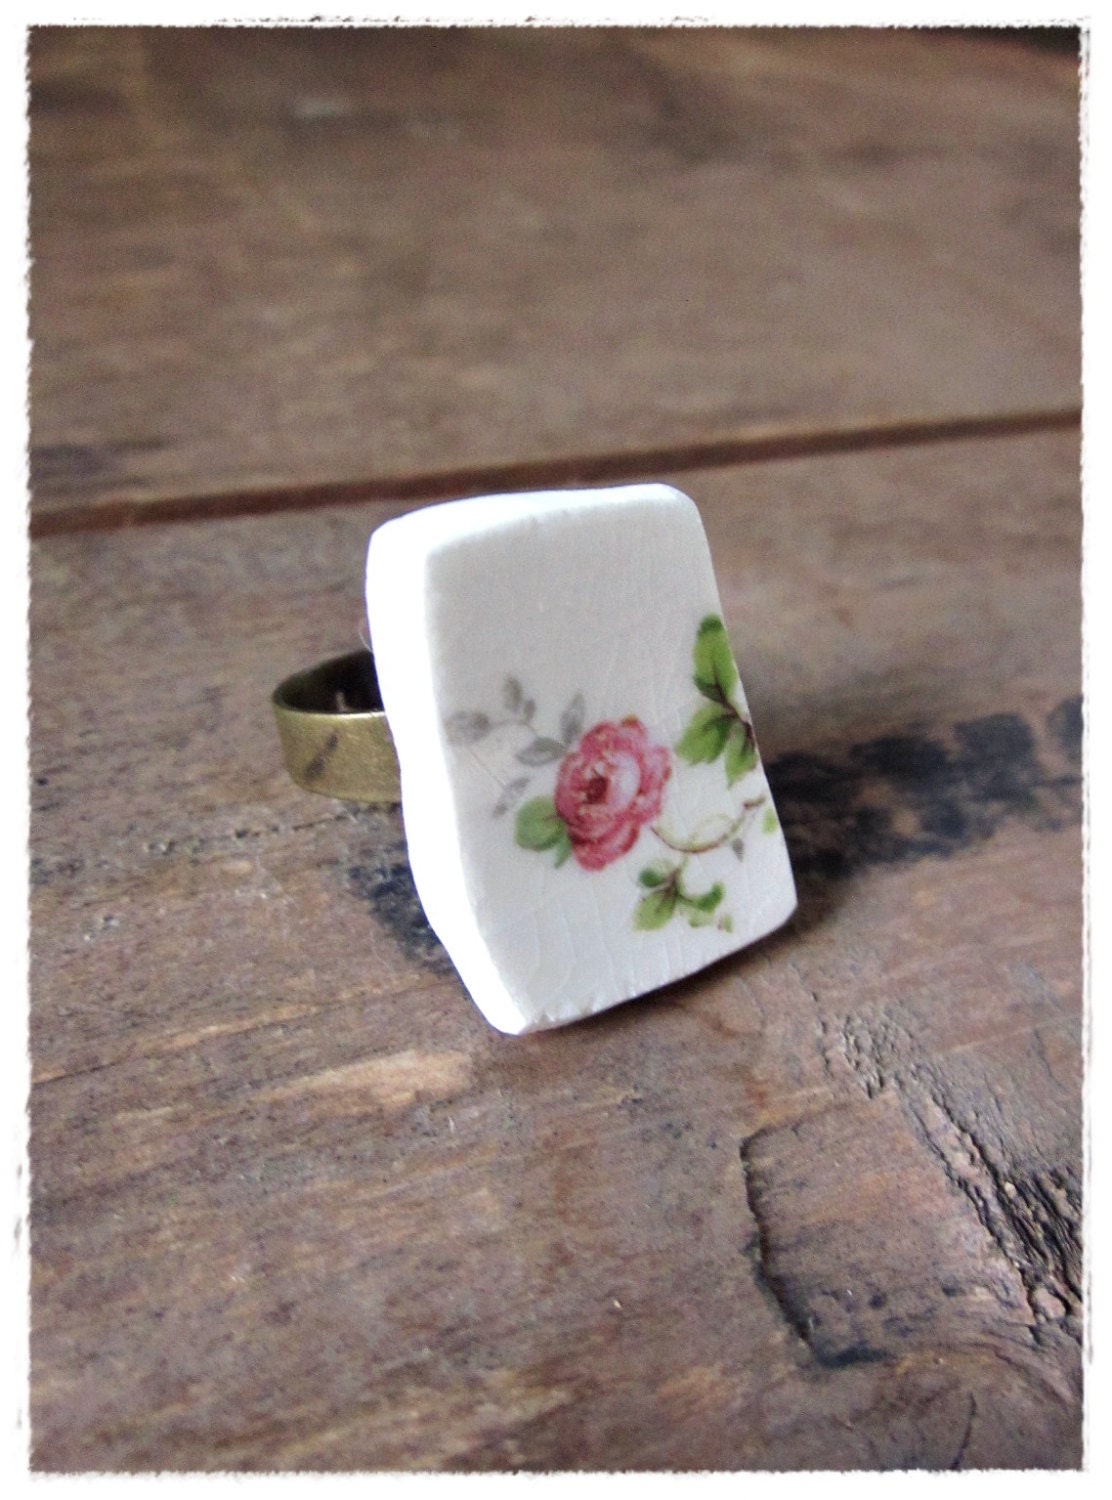 Vintage China Cocktail Ring, Shabby, Chic, Porcelain Rose Ring, Recycled China, Eco Friendly, Upcycled, Repurposed, Statement Jewelry